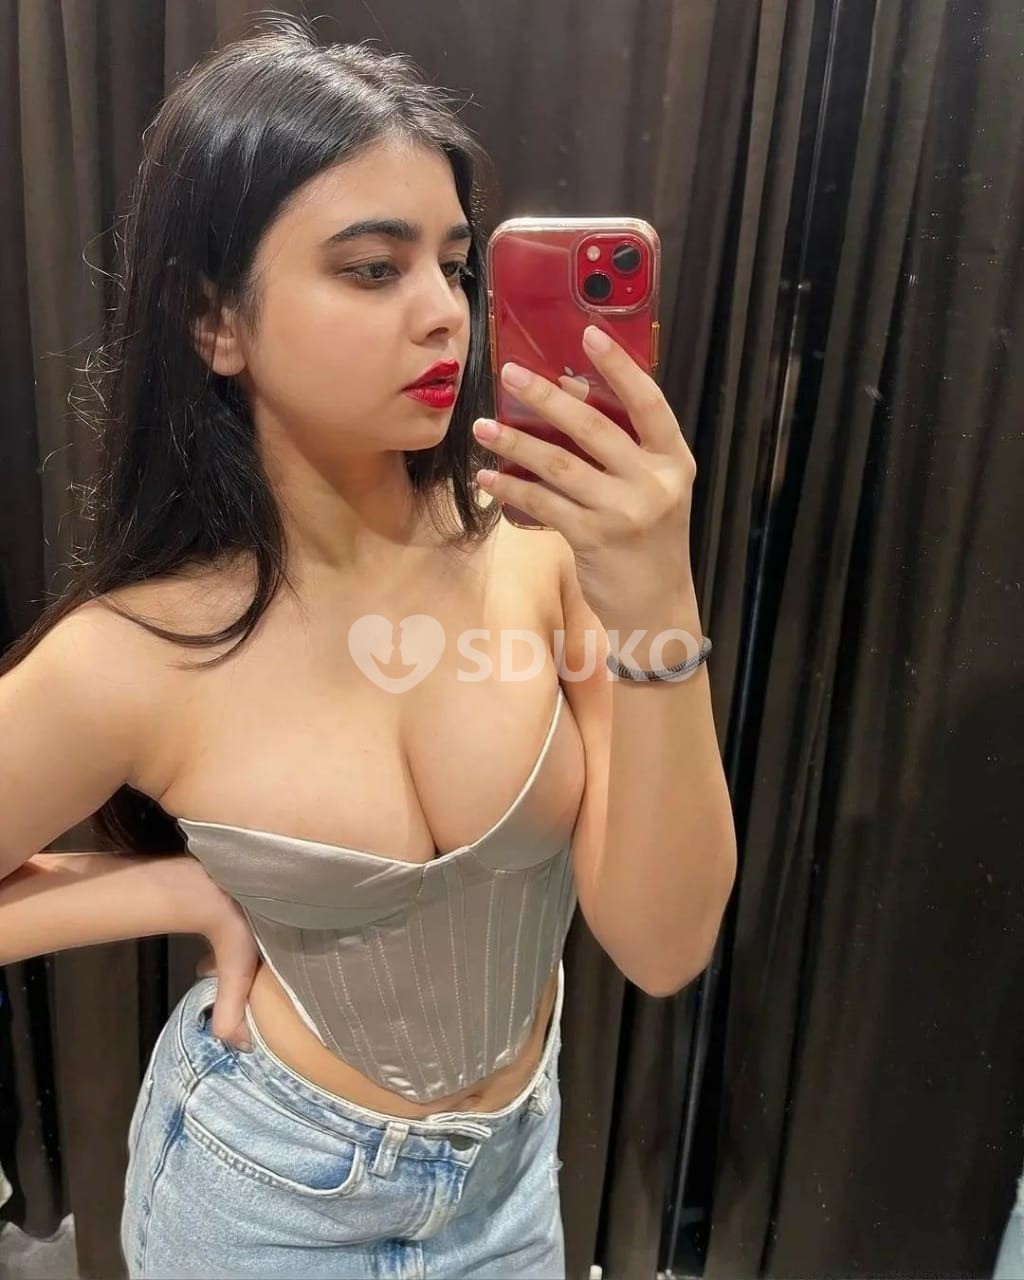 KHARADI VIP TODAY LOW PRICE ;/ESCORT 🥰SERVICE 100% SAFE AND SECURE ANYTIME CALL ME 24 X 7 SERVICE AVAILABLE 100% SAFE